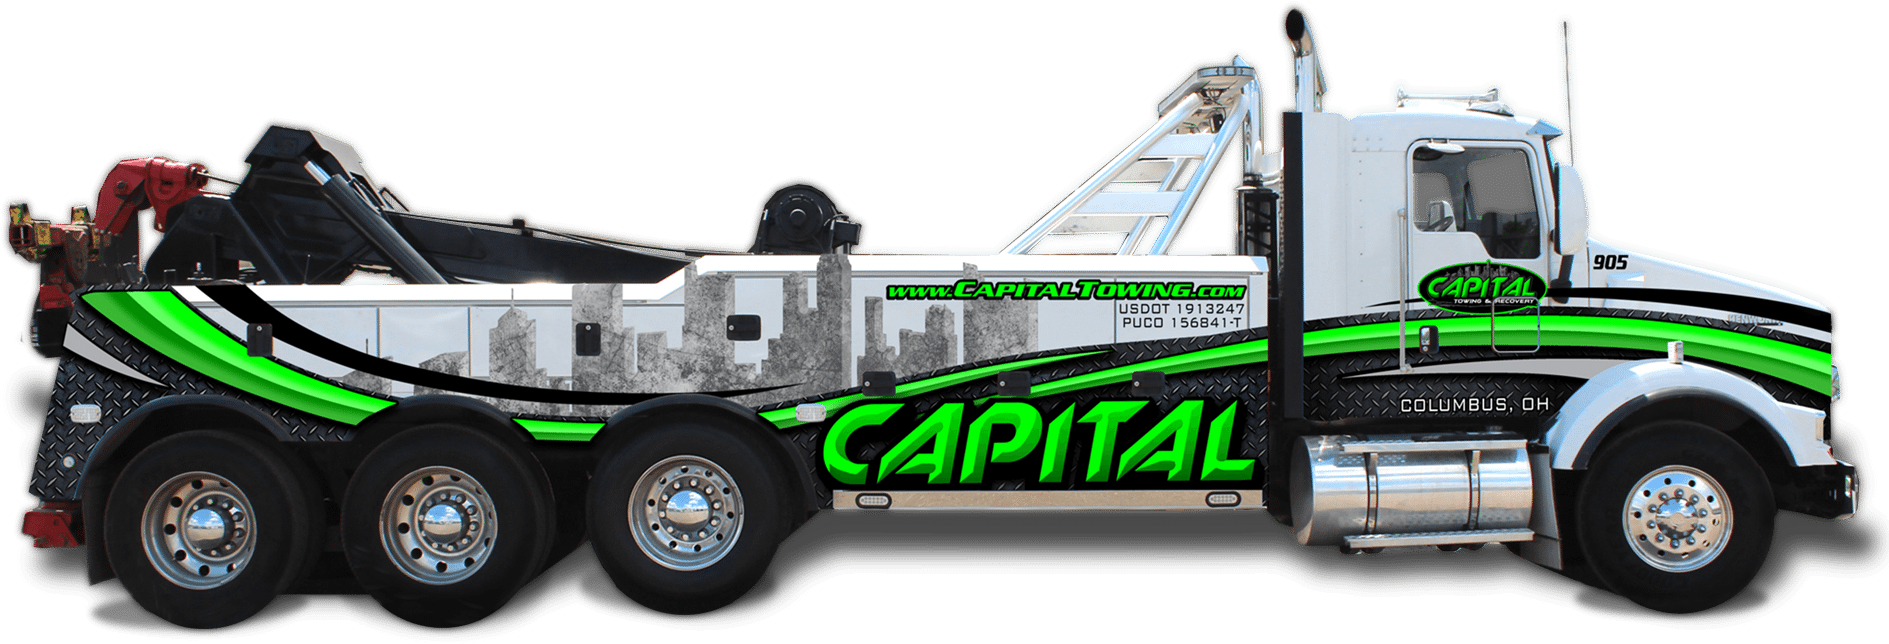 Capital Towing & Recovery Photo